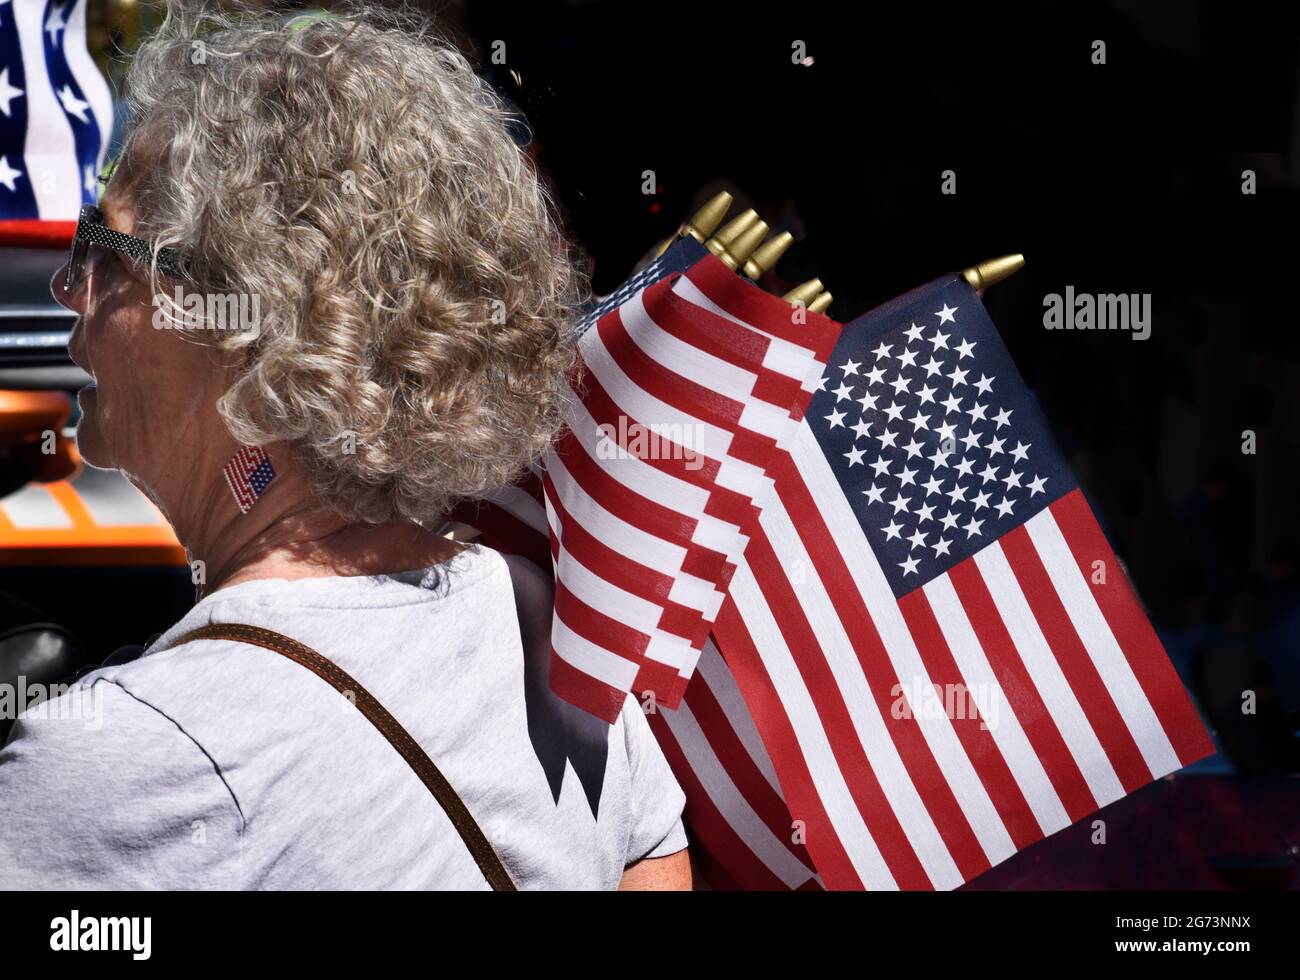 A woman distributes small American flags at a Fourth of July classic car show in Santa Fe, New Mexico. Stock Photo